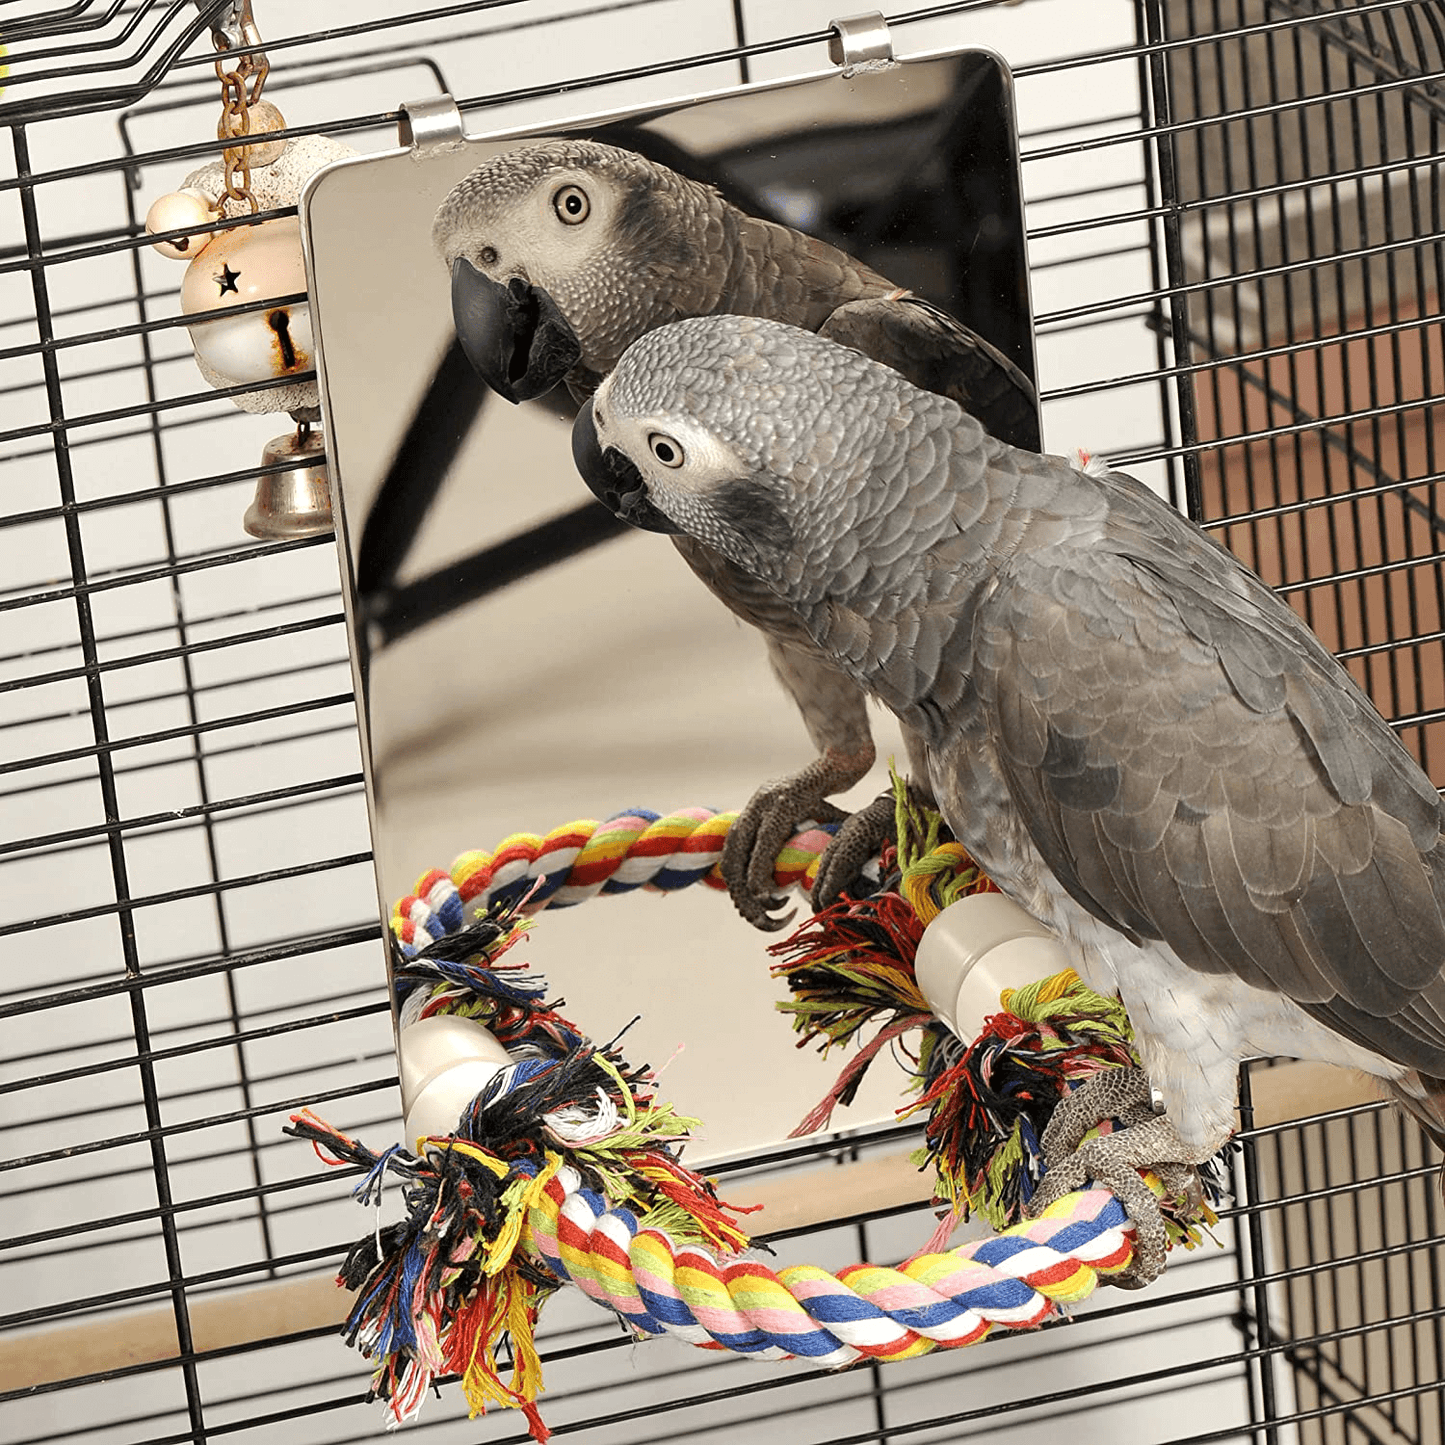 9 Inch Stainless Steel Bird Mirror with Rope Perch, Bird Toys Swing (Large)